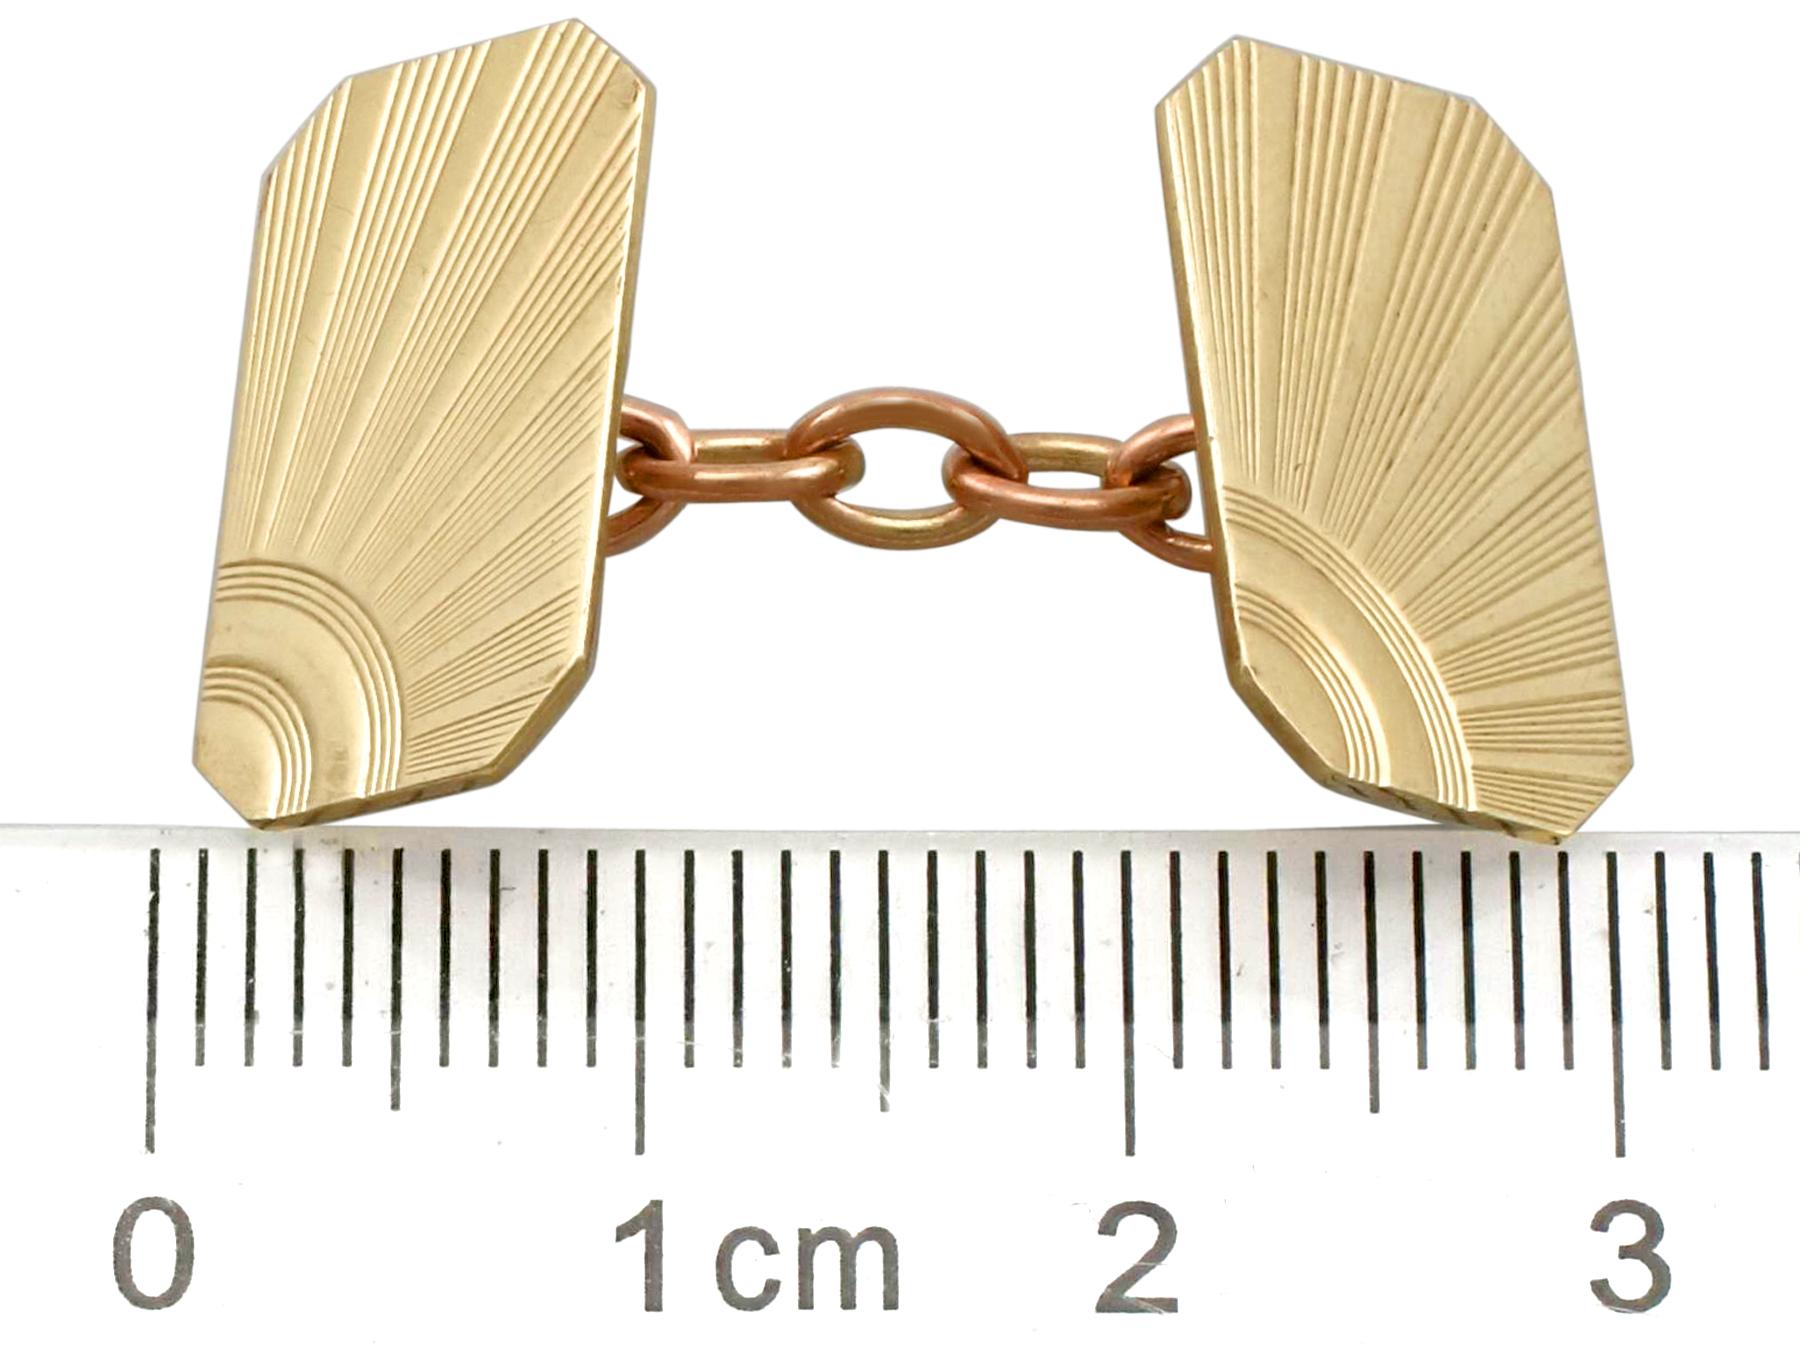 Art Deco Style 1967 Cufflinks in 9 Karat Yellow Gold In Excellent Condition For Sale In Jesmond, Newcastle Upon Tyne